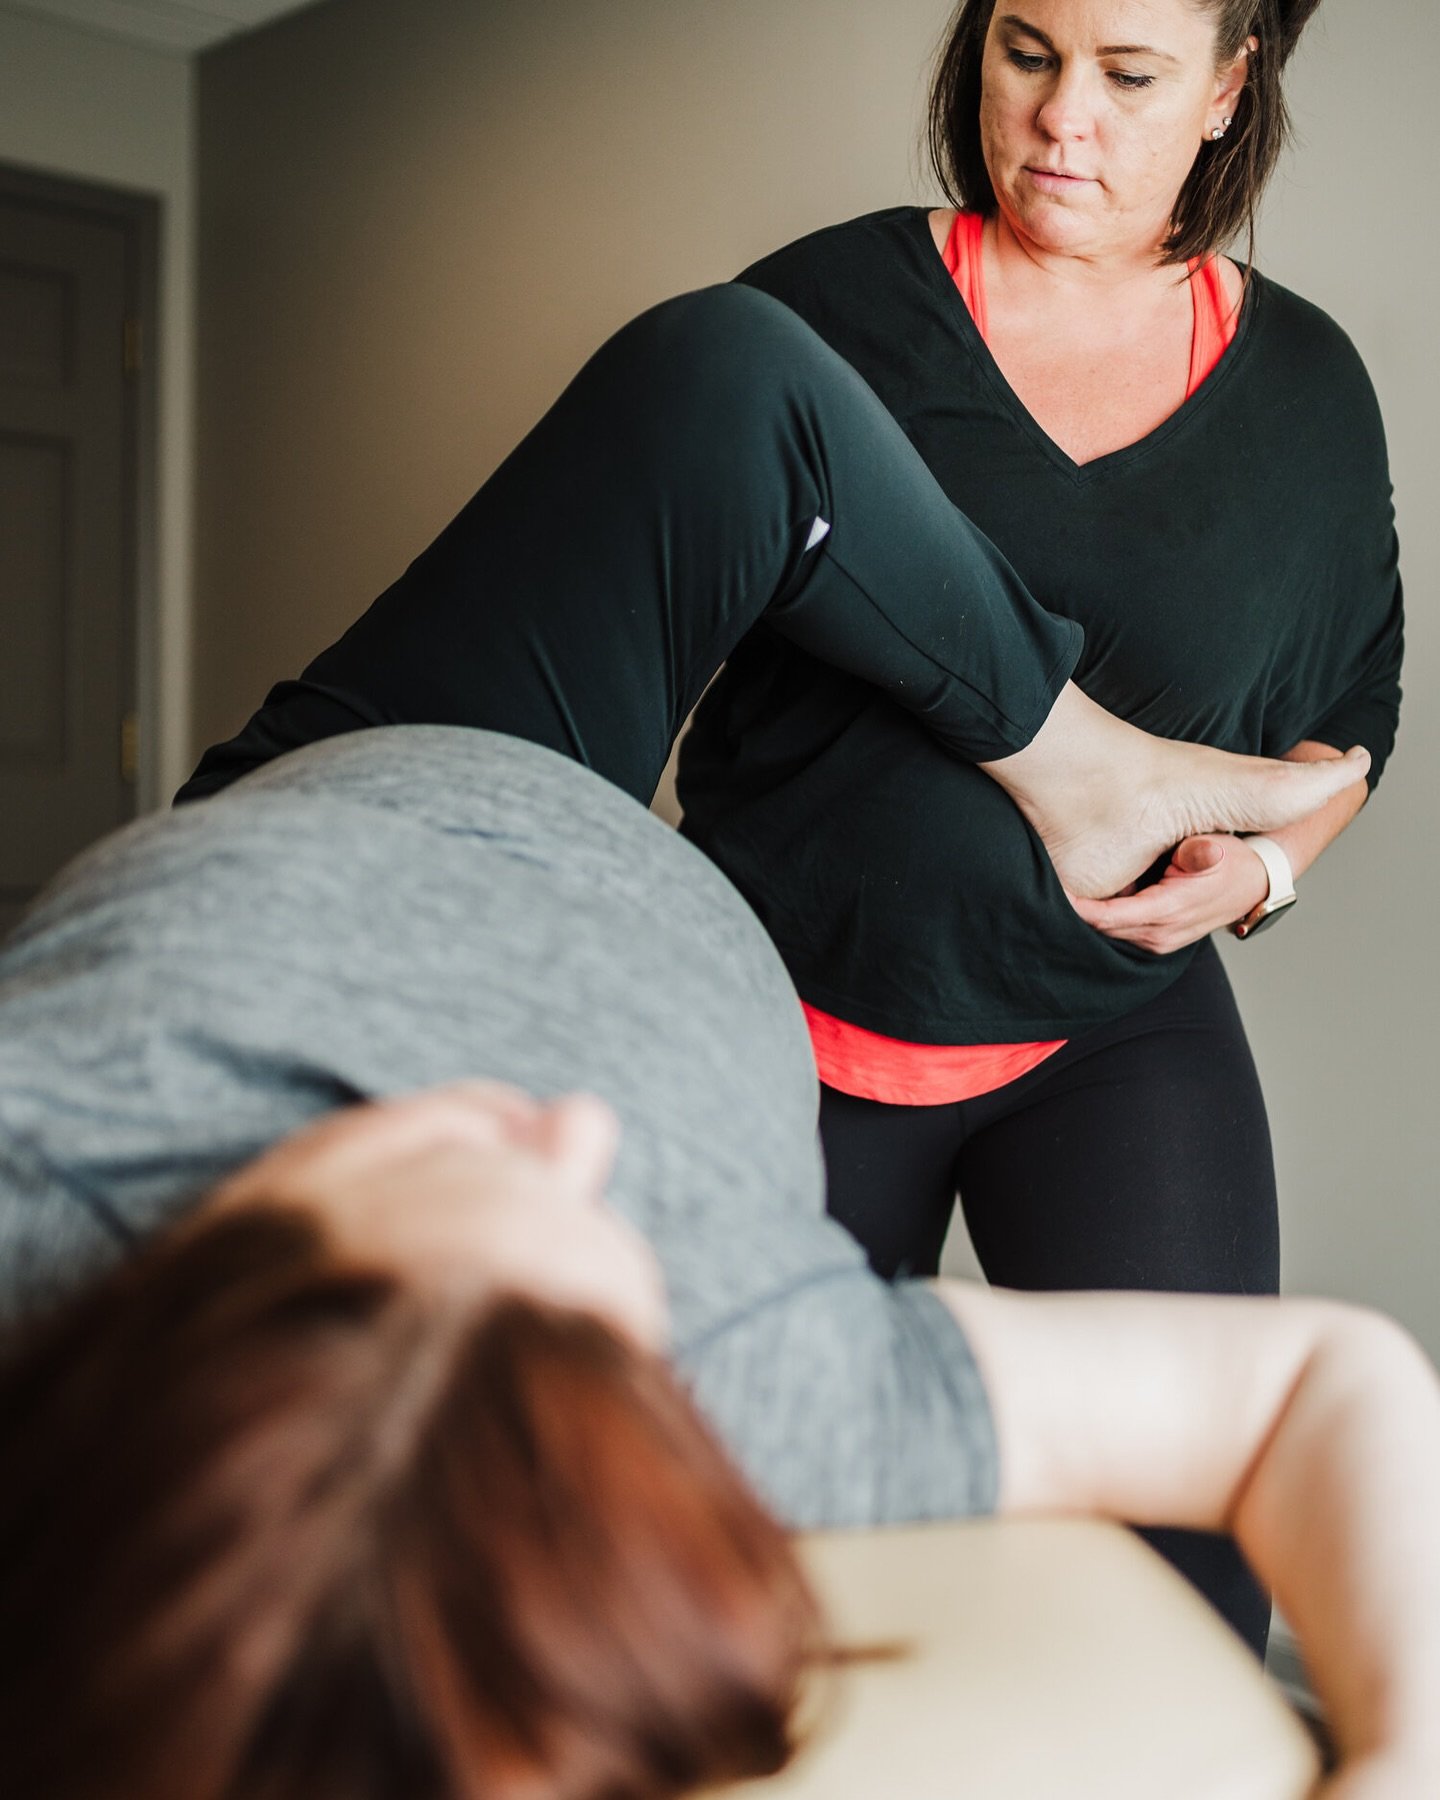 FASCIAL STRETCH THERAPY

▪️Improved flexibility and mobility
▫️Reduced muscle tension and stiffness
▪️Enhanced athletic performance
▫️Increased blood circulation
▪️Alleviation of chronic pain
▫️Improved posture and alignment
▪️Enhanced relaxation and